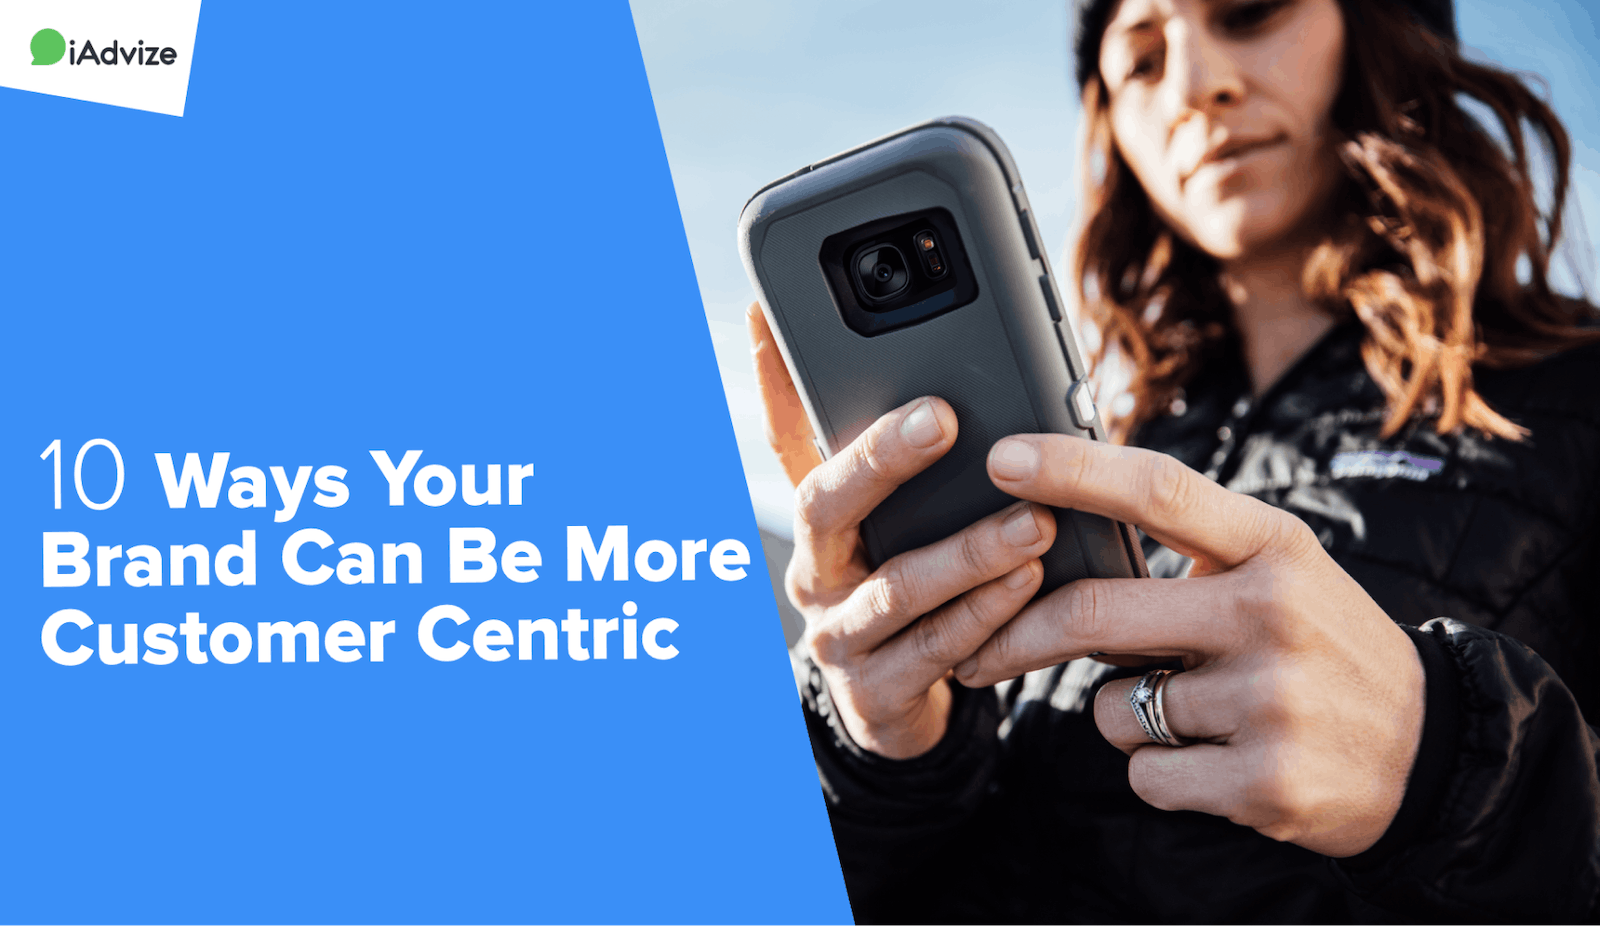 10 Ways Your Brand Can Be More Customer Centric